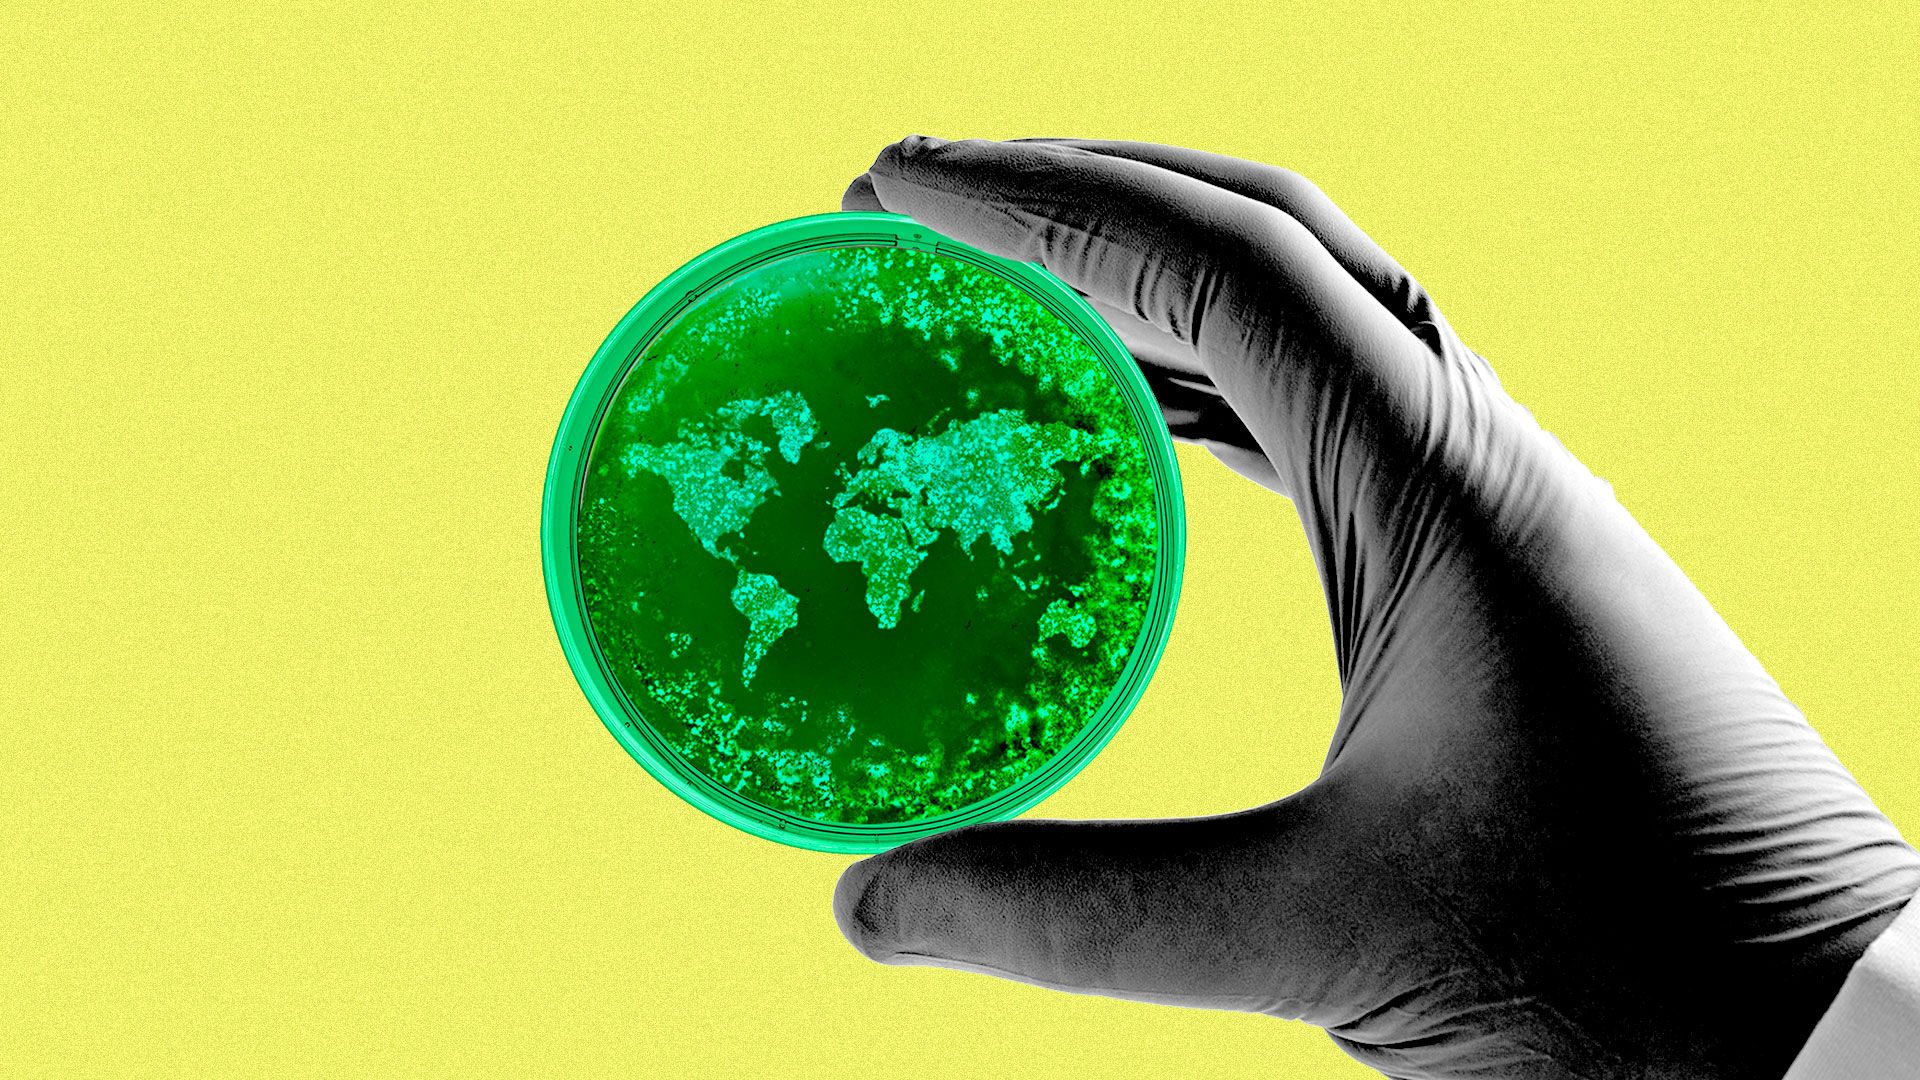 Illustration of a scientist's gloved hand holding a petri dish with the world made out of bacteria